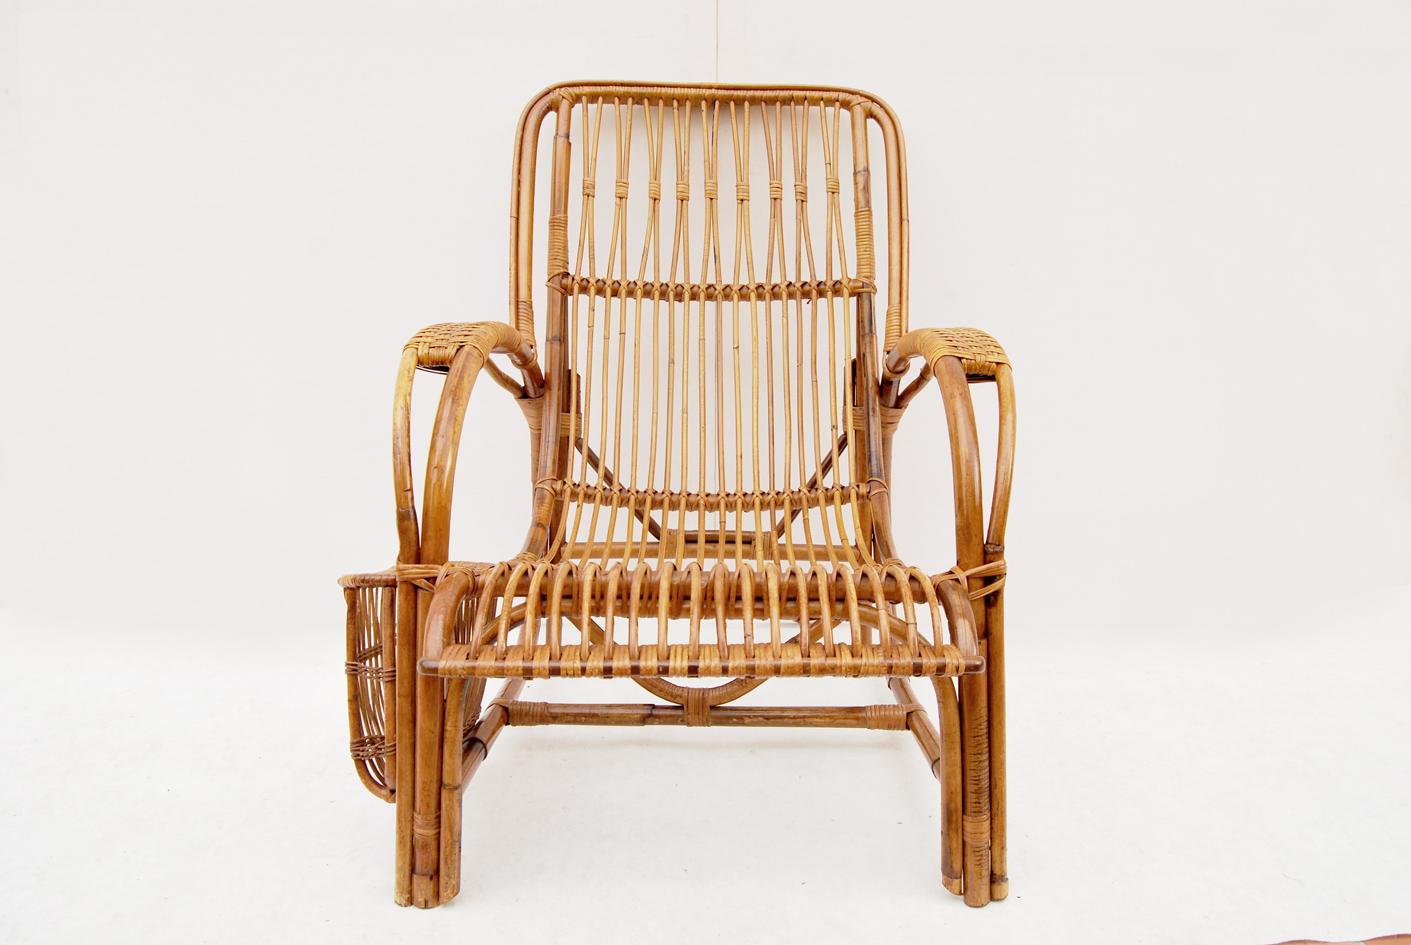 This rare vintage bamboo and wicker armchair dates from the second half of the 20th century. Its very beautiful shape, skillful weaving and side magazine pocket make it a unique piece that will enrich any outdoor or indoor setting.
The item is in